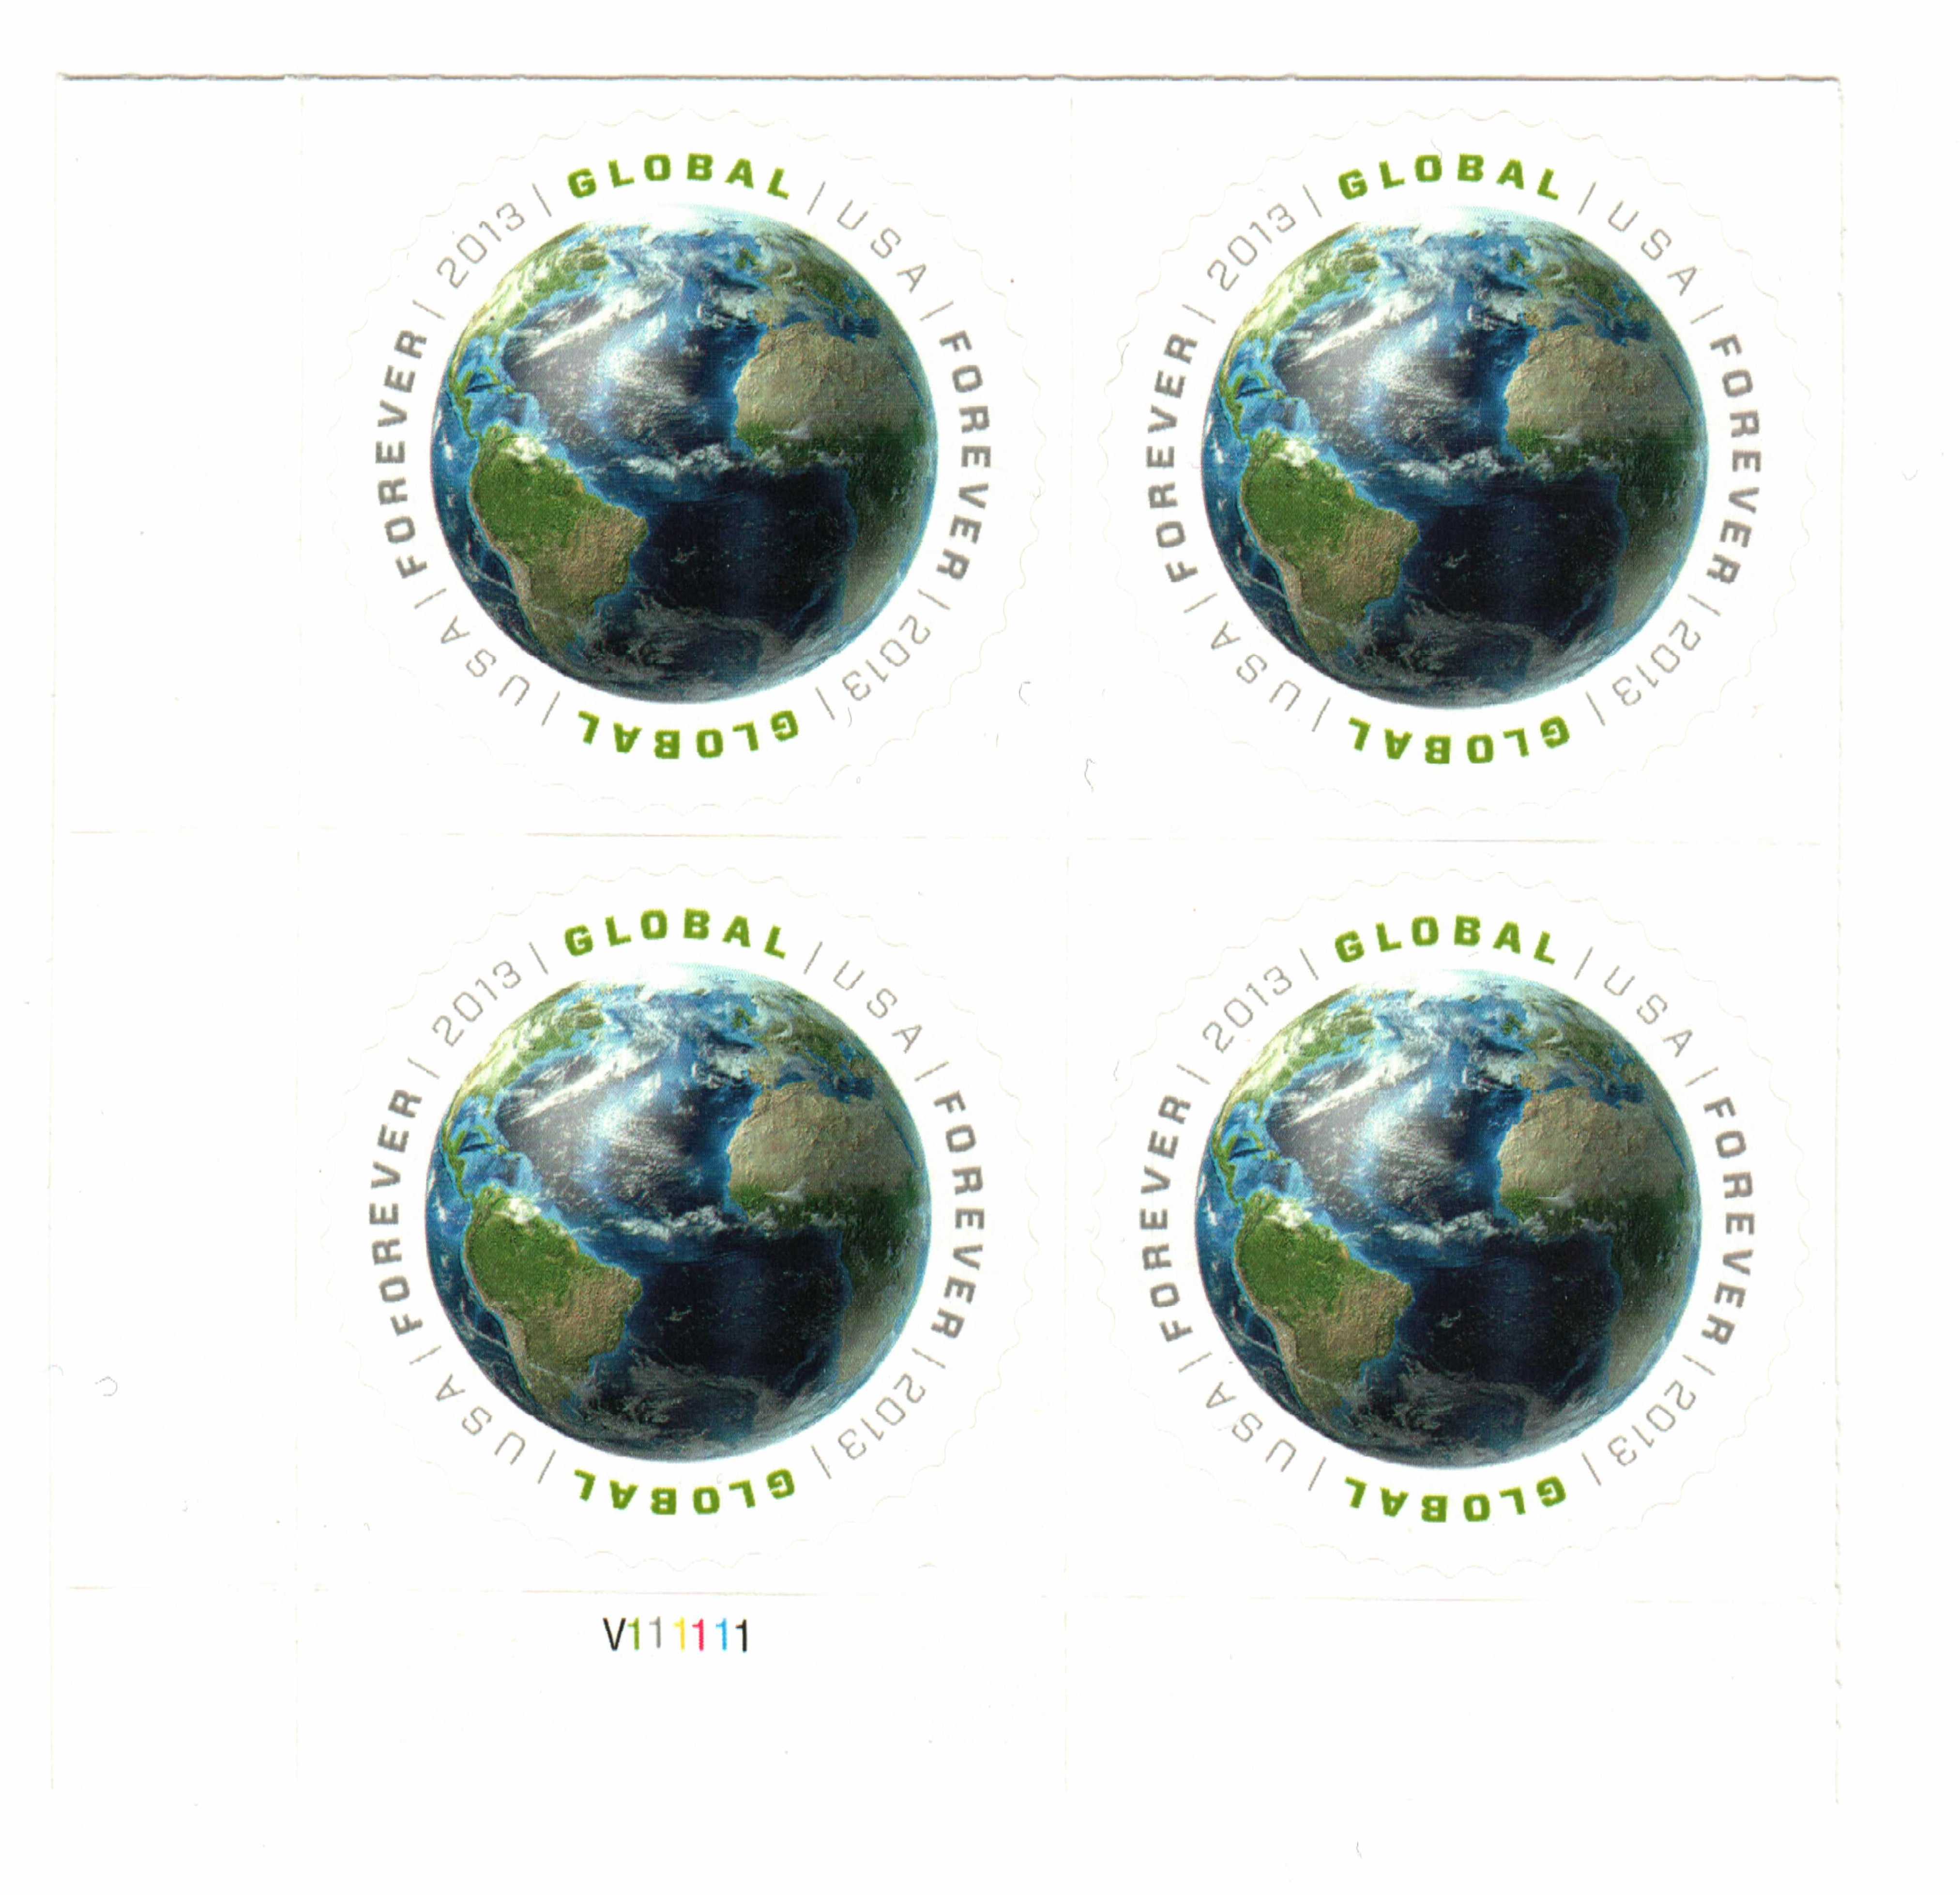 USA Global International Forever Stamps Pane of 10 – FallenCollector